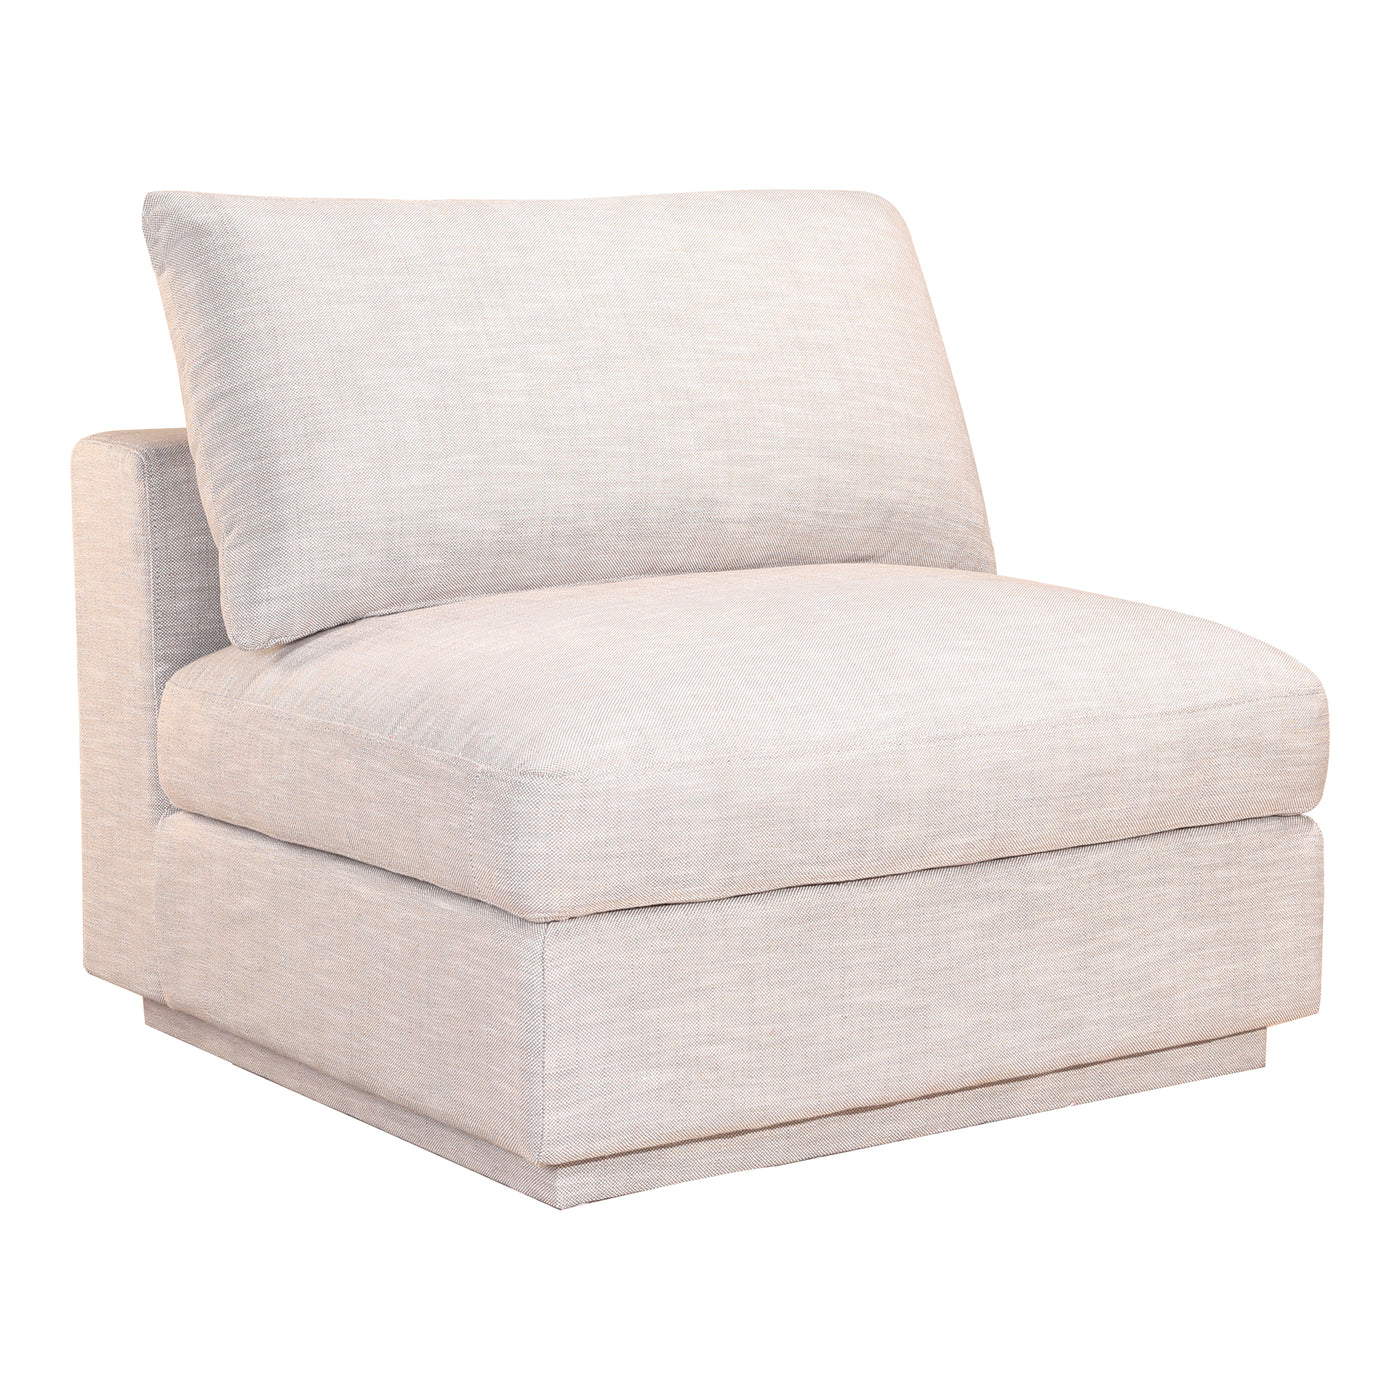 The Justin Slipper Chair's classic design and soft linen finish make it the perfect addition to your living room. Its pale...